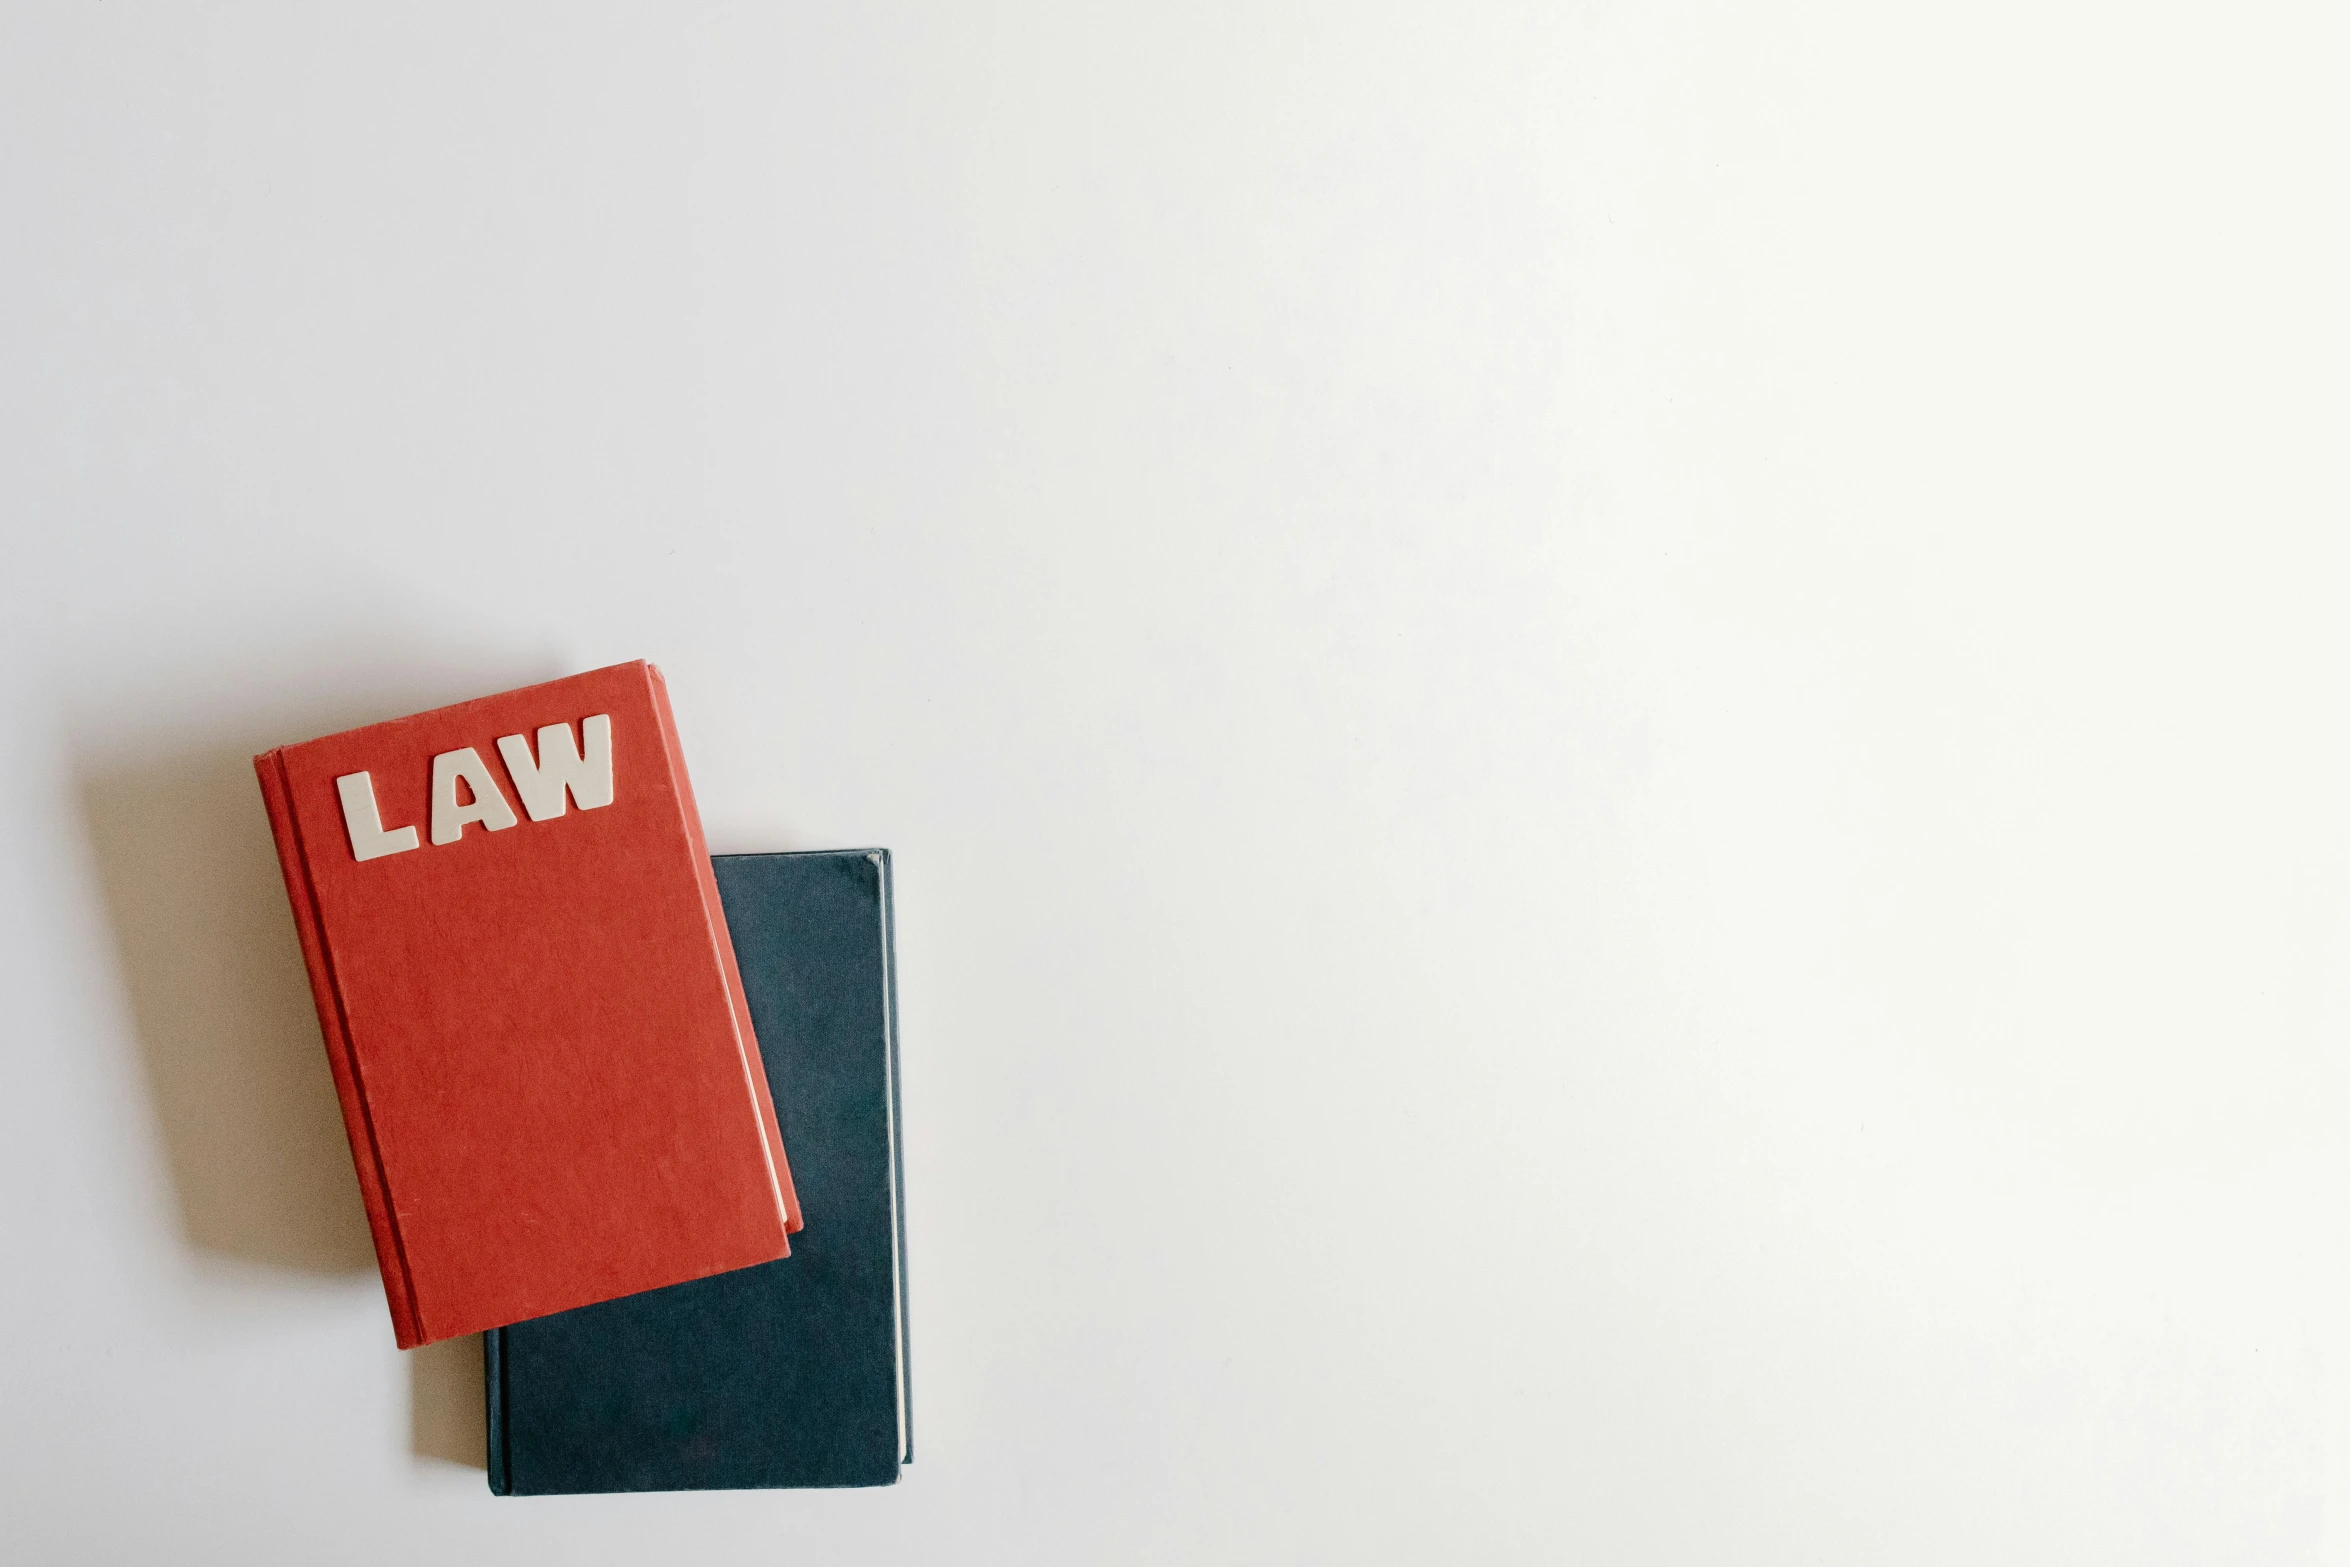 a couple of books sitting on top of each other, an album cover, unsplash, minimalism, law - alligned, background image, lawyer, notebook